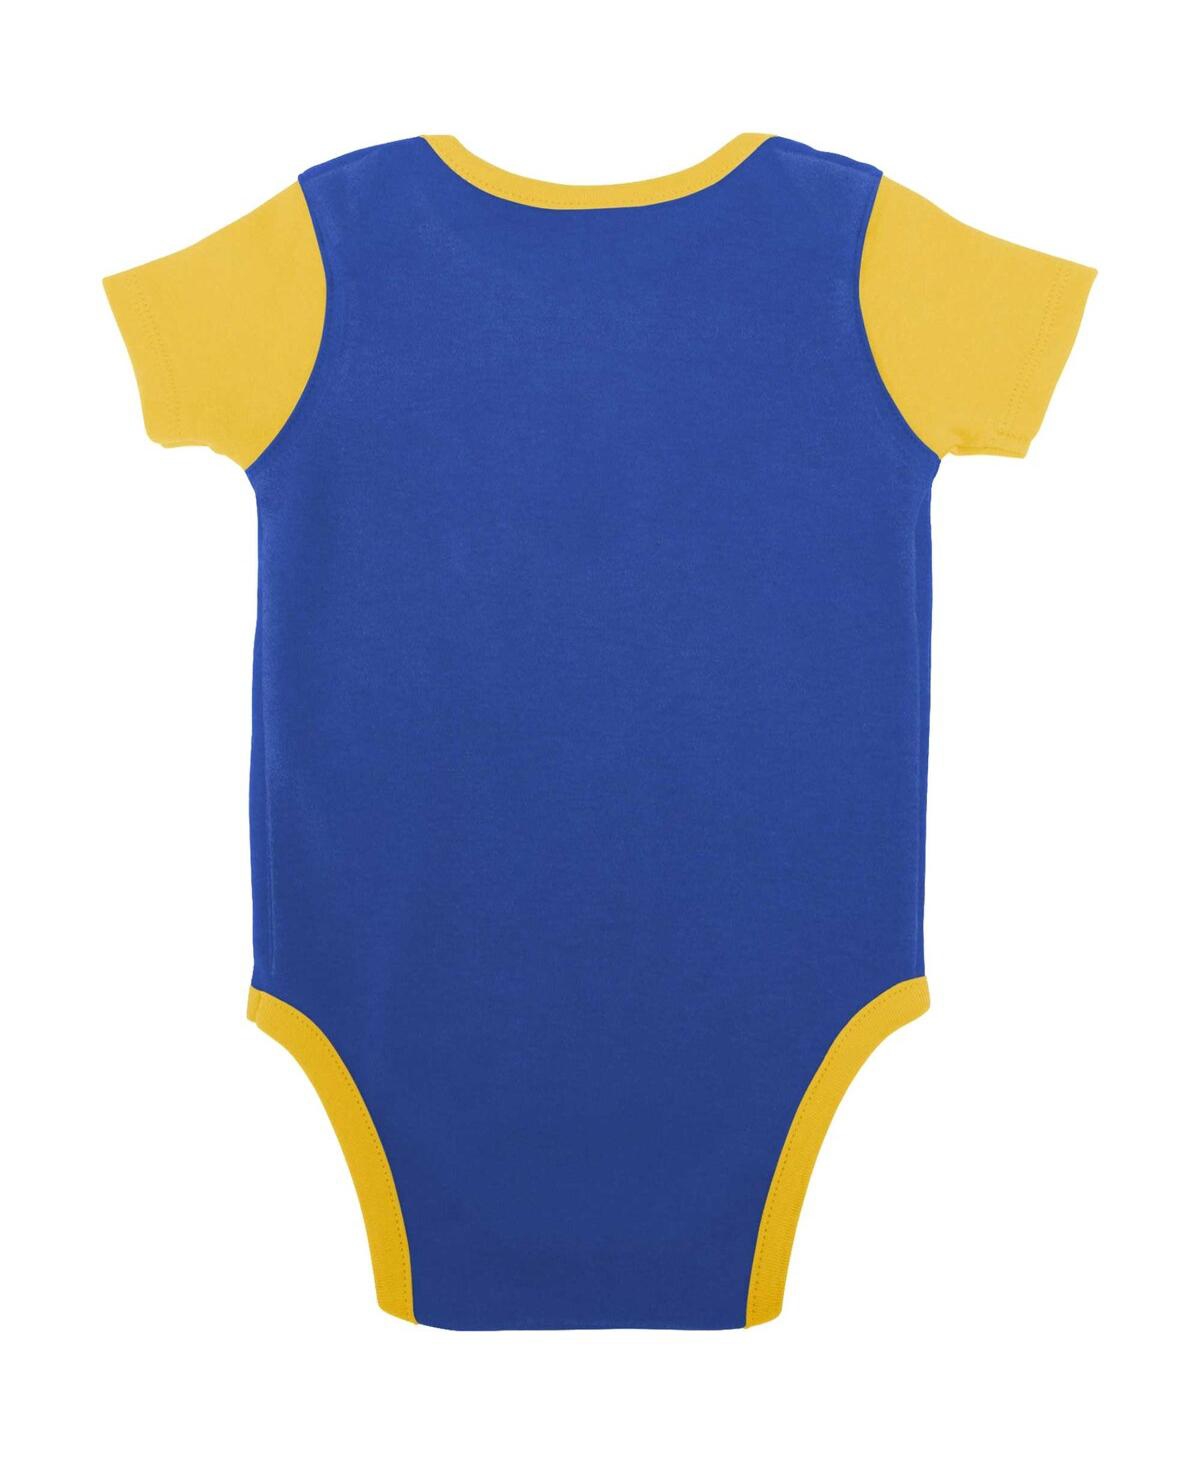 Shop Outerstuff Baby Boys And Girls Royal, Gold Los Angeles Rams Home Field Advantage Three-piece Bodysuit, Bib And  In Royal,gold